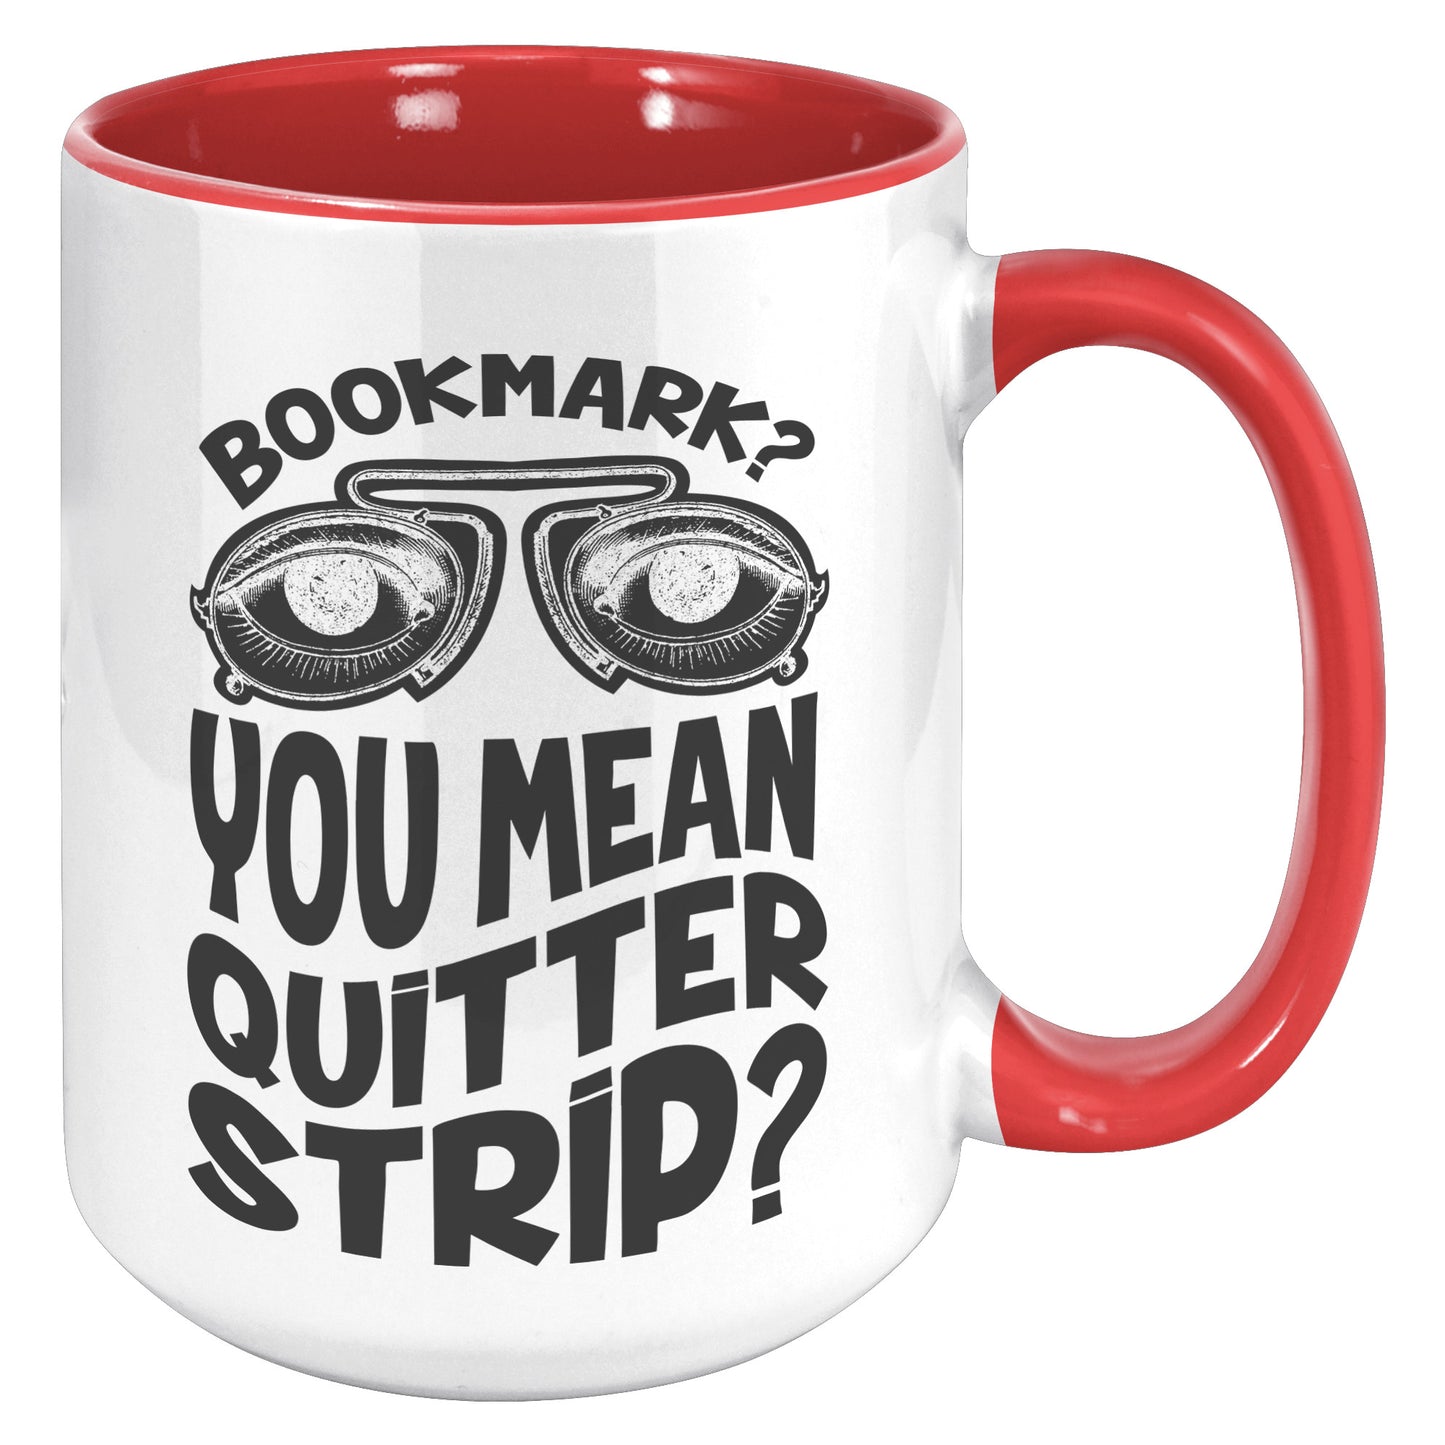 Bookmark? You Mean Quitter Strip? | Accent Mug